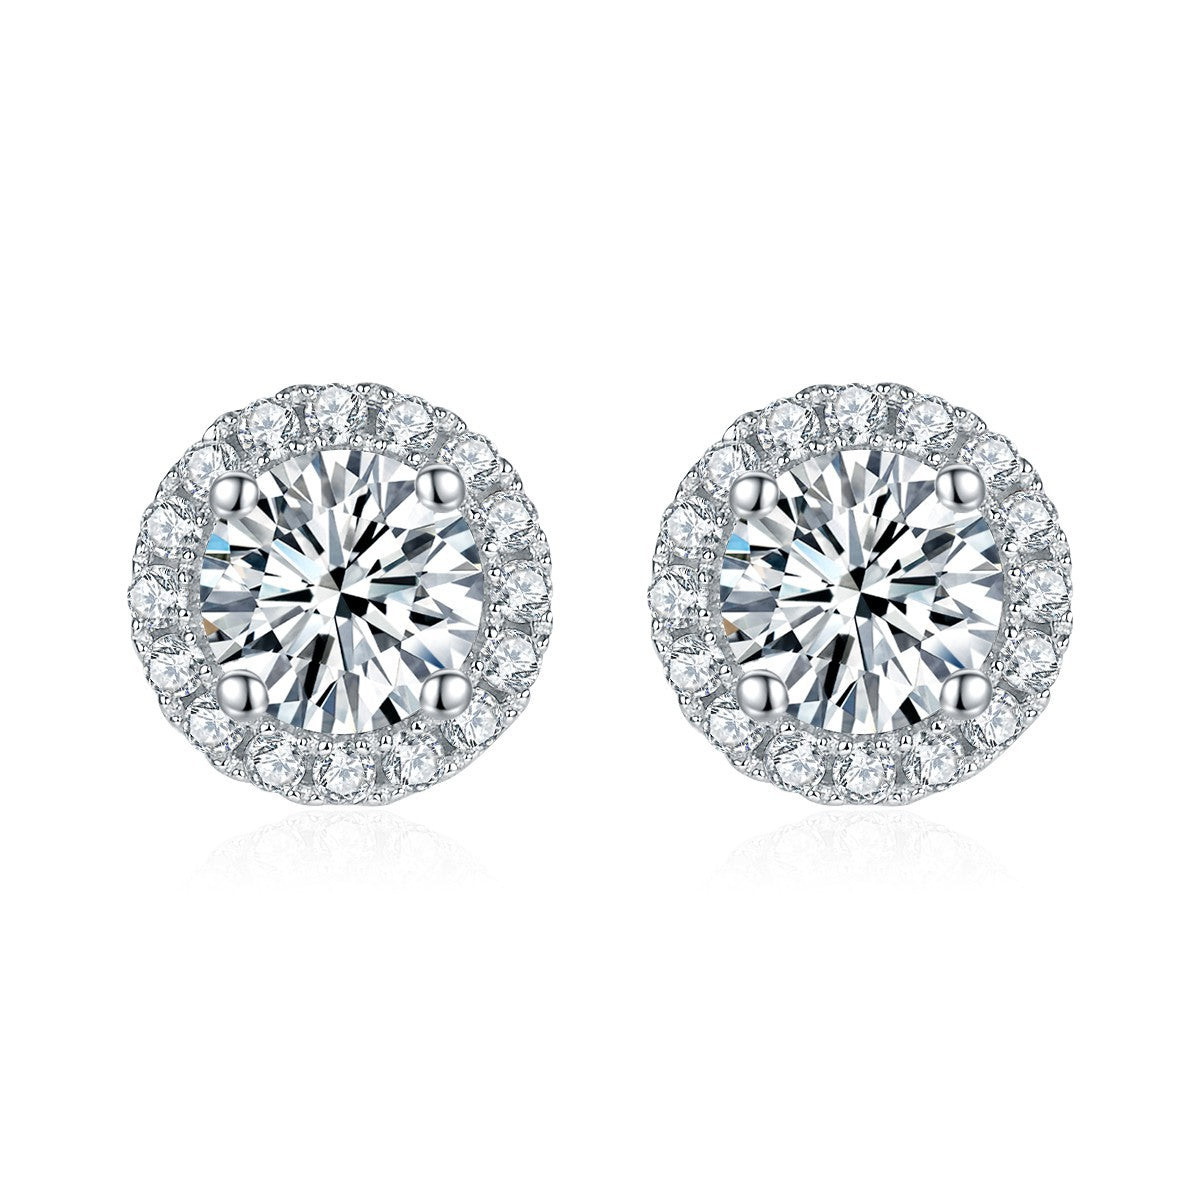 The Classic Series 1ct Moissanite Earrings Studs